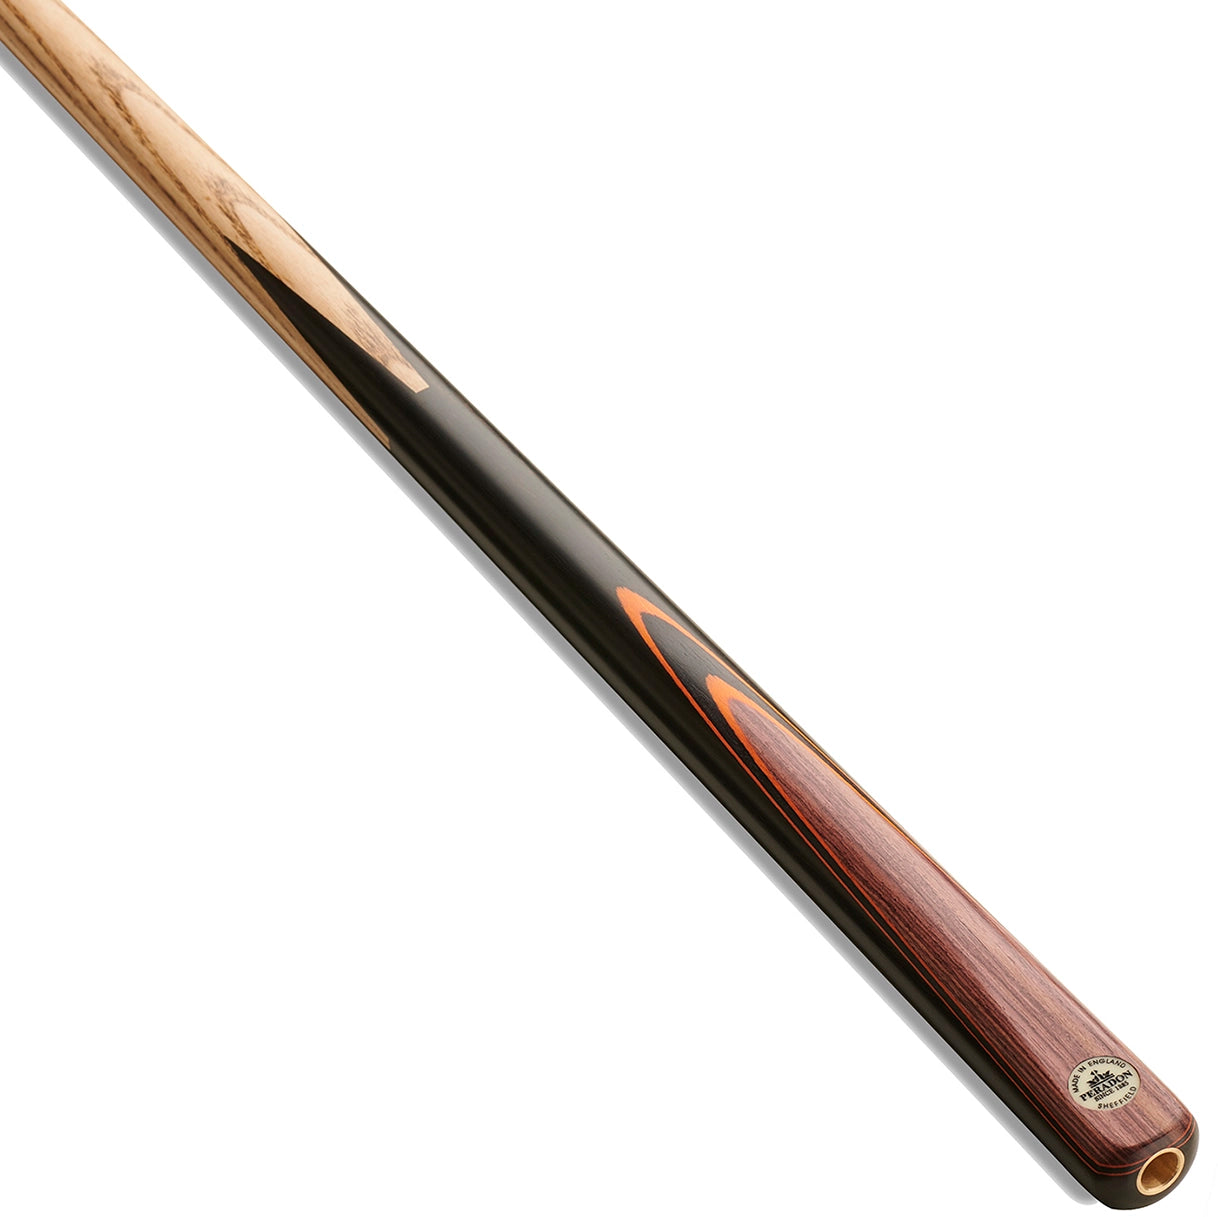 Peradon Sheffield 3/4 Jointed Snooker Cue. On angle view